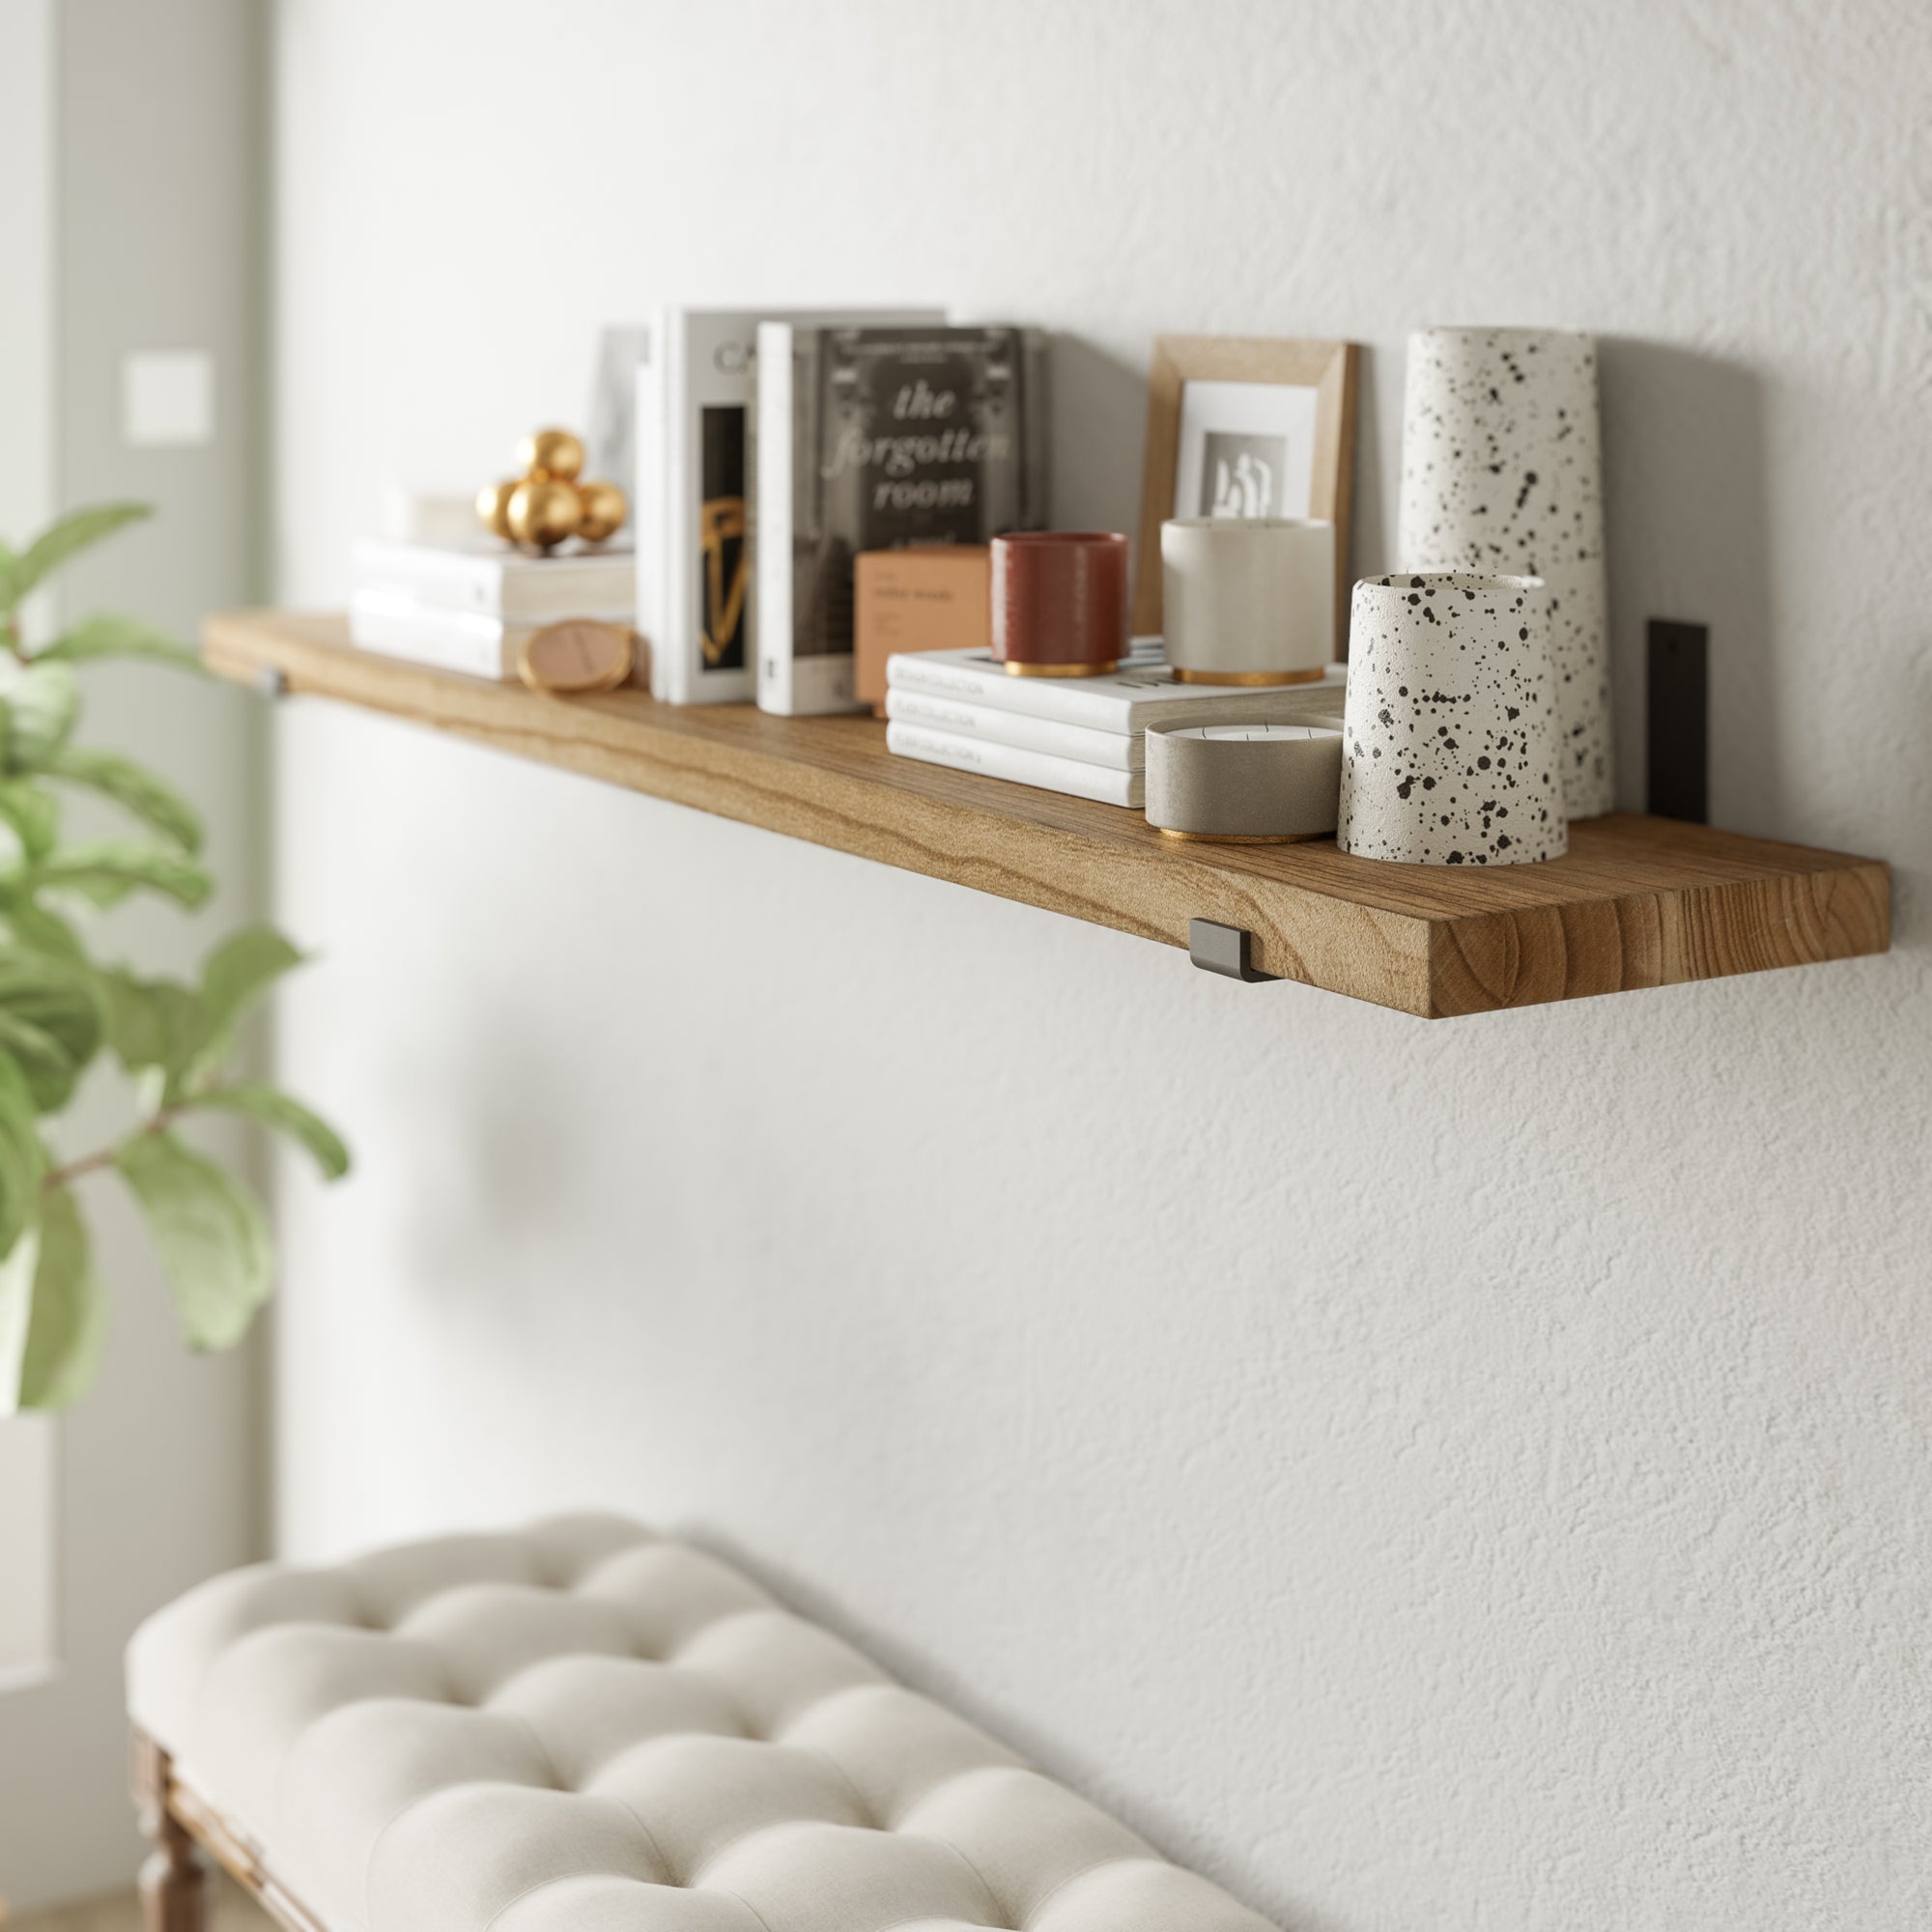 60'' wood shelf with books and décor against a textured wall, close-up.